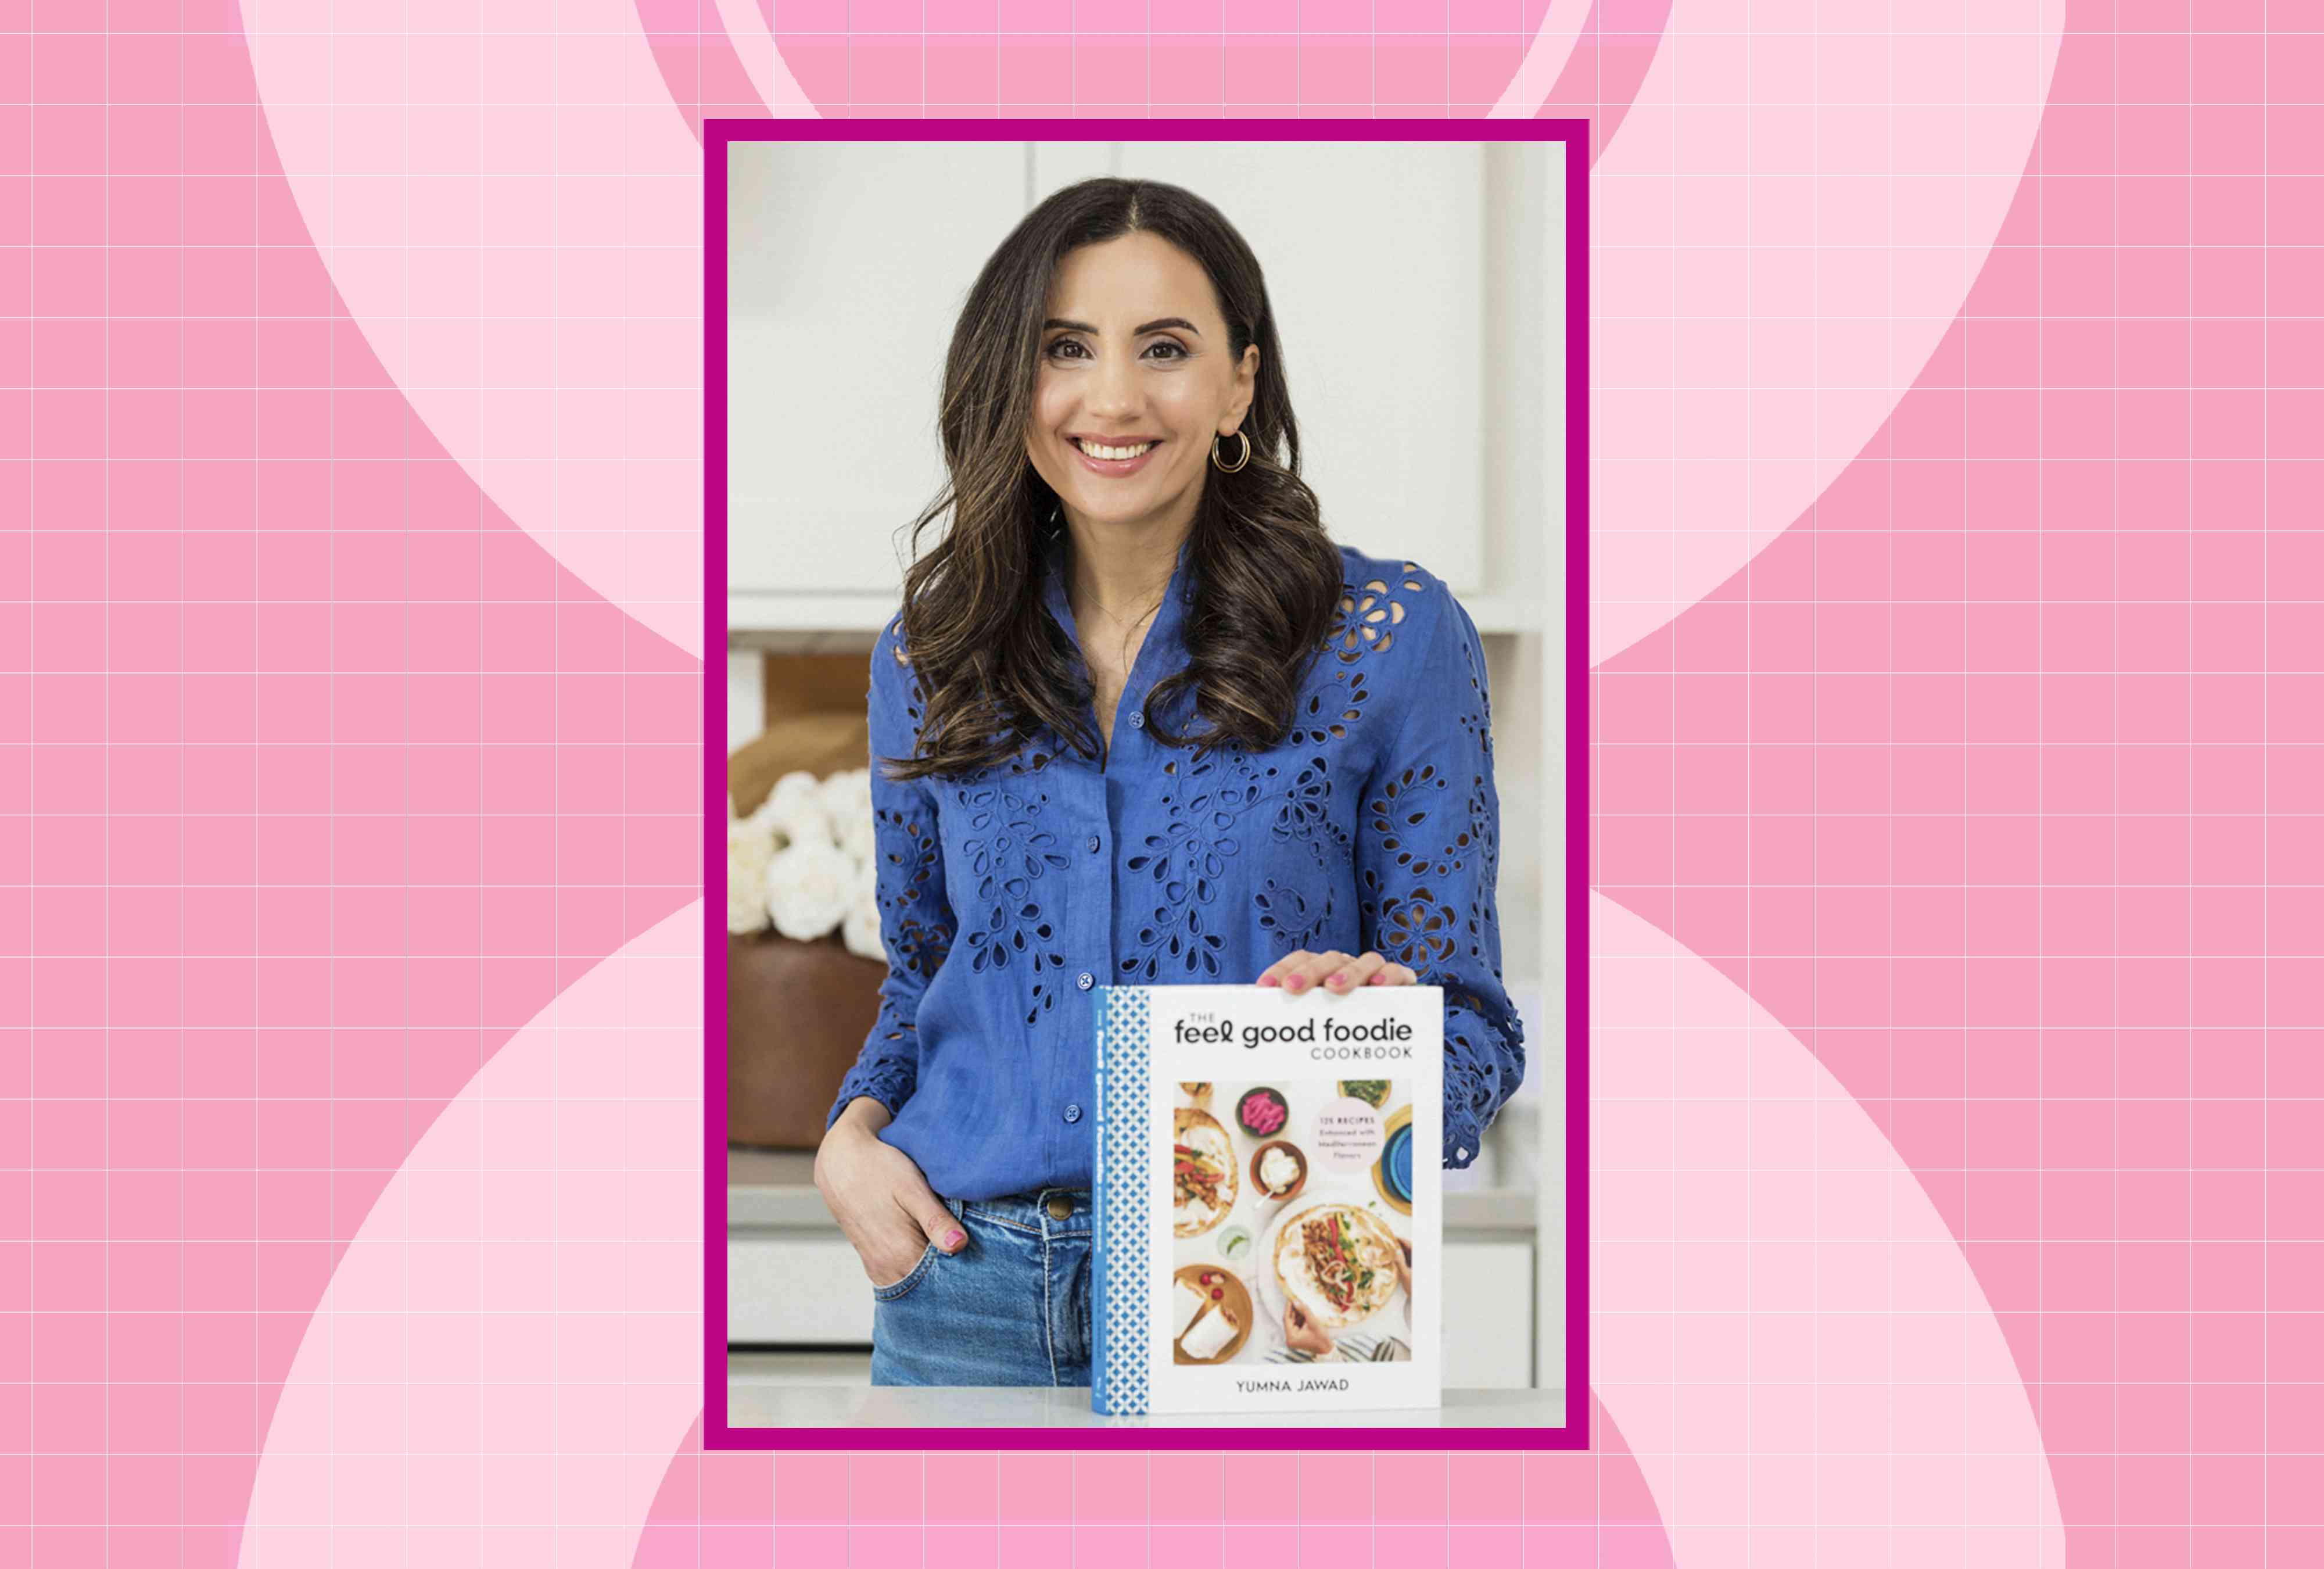 Feel Good Foodie's Yumna Jawad Dishes on Her New Cookbook—and Shares a High-Protein Stuffed Pepper Recipe